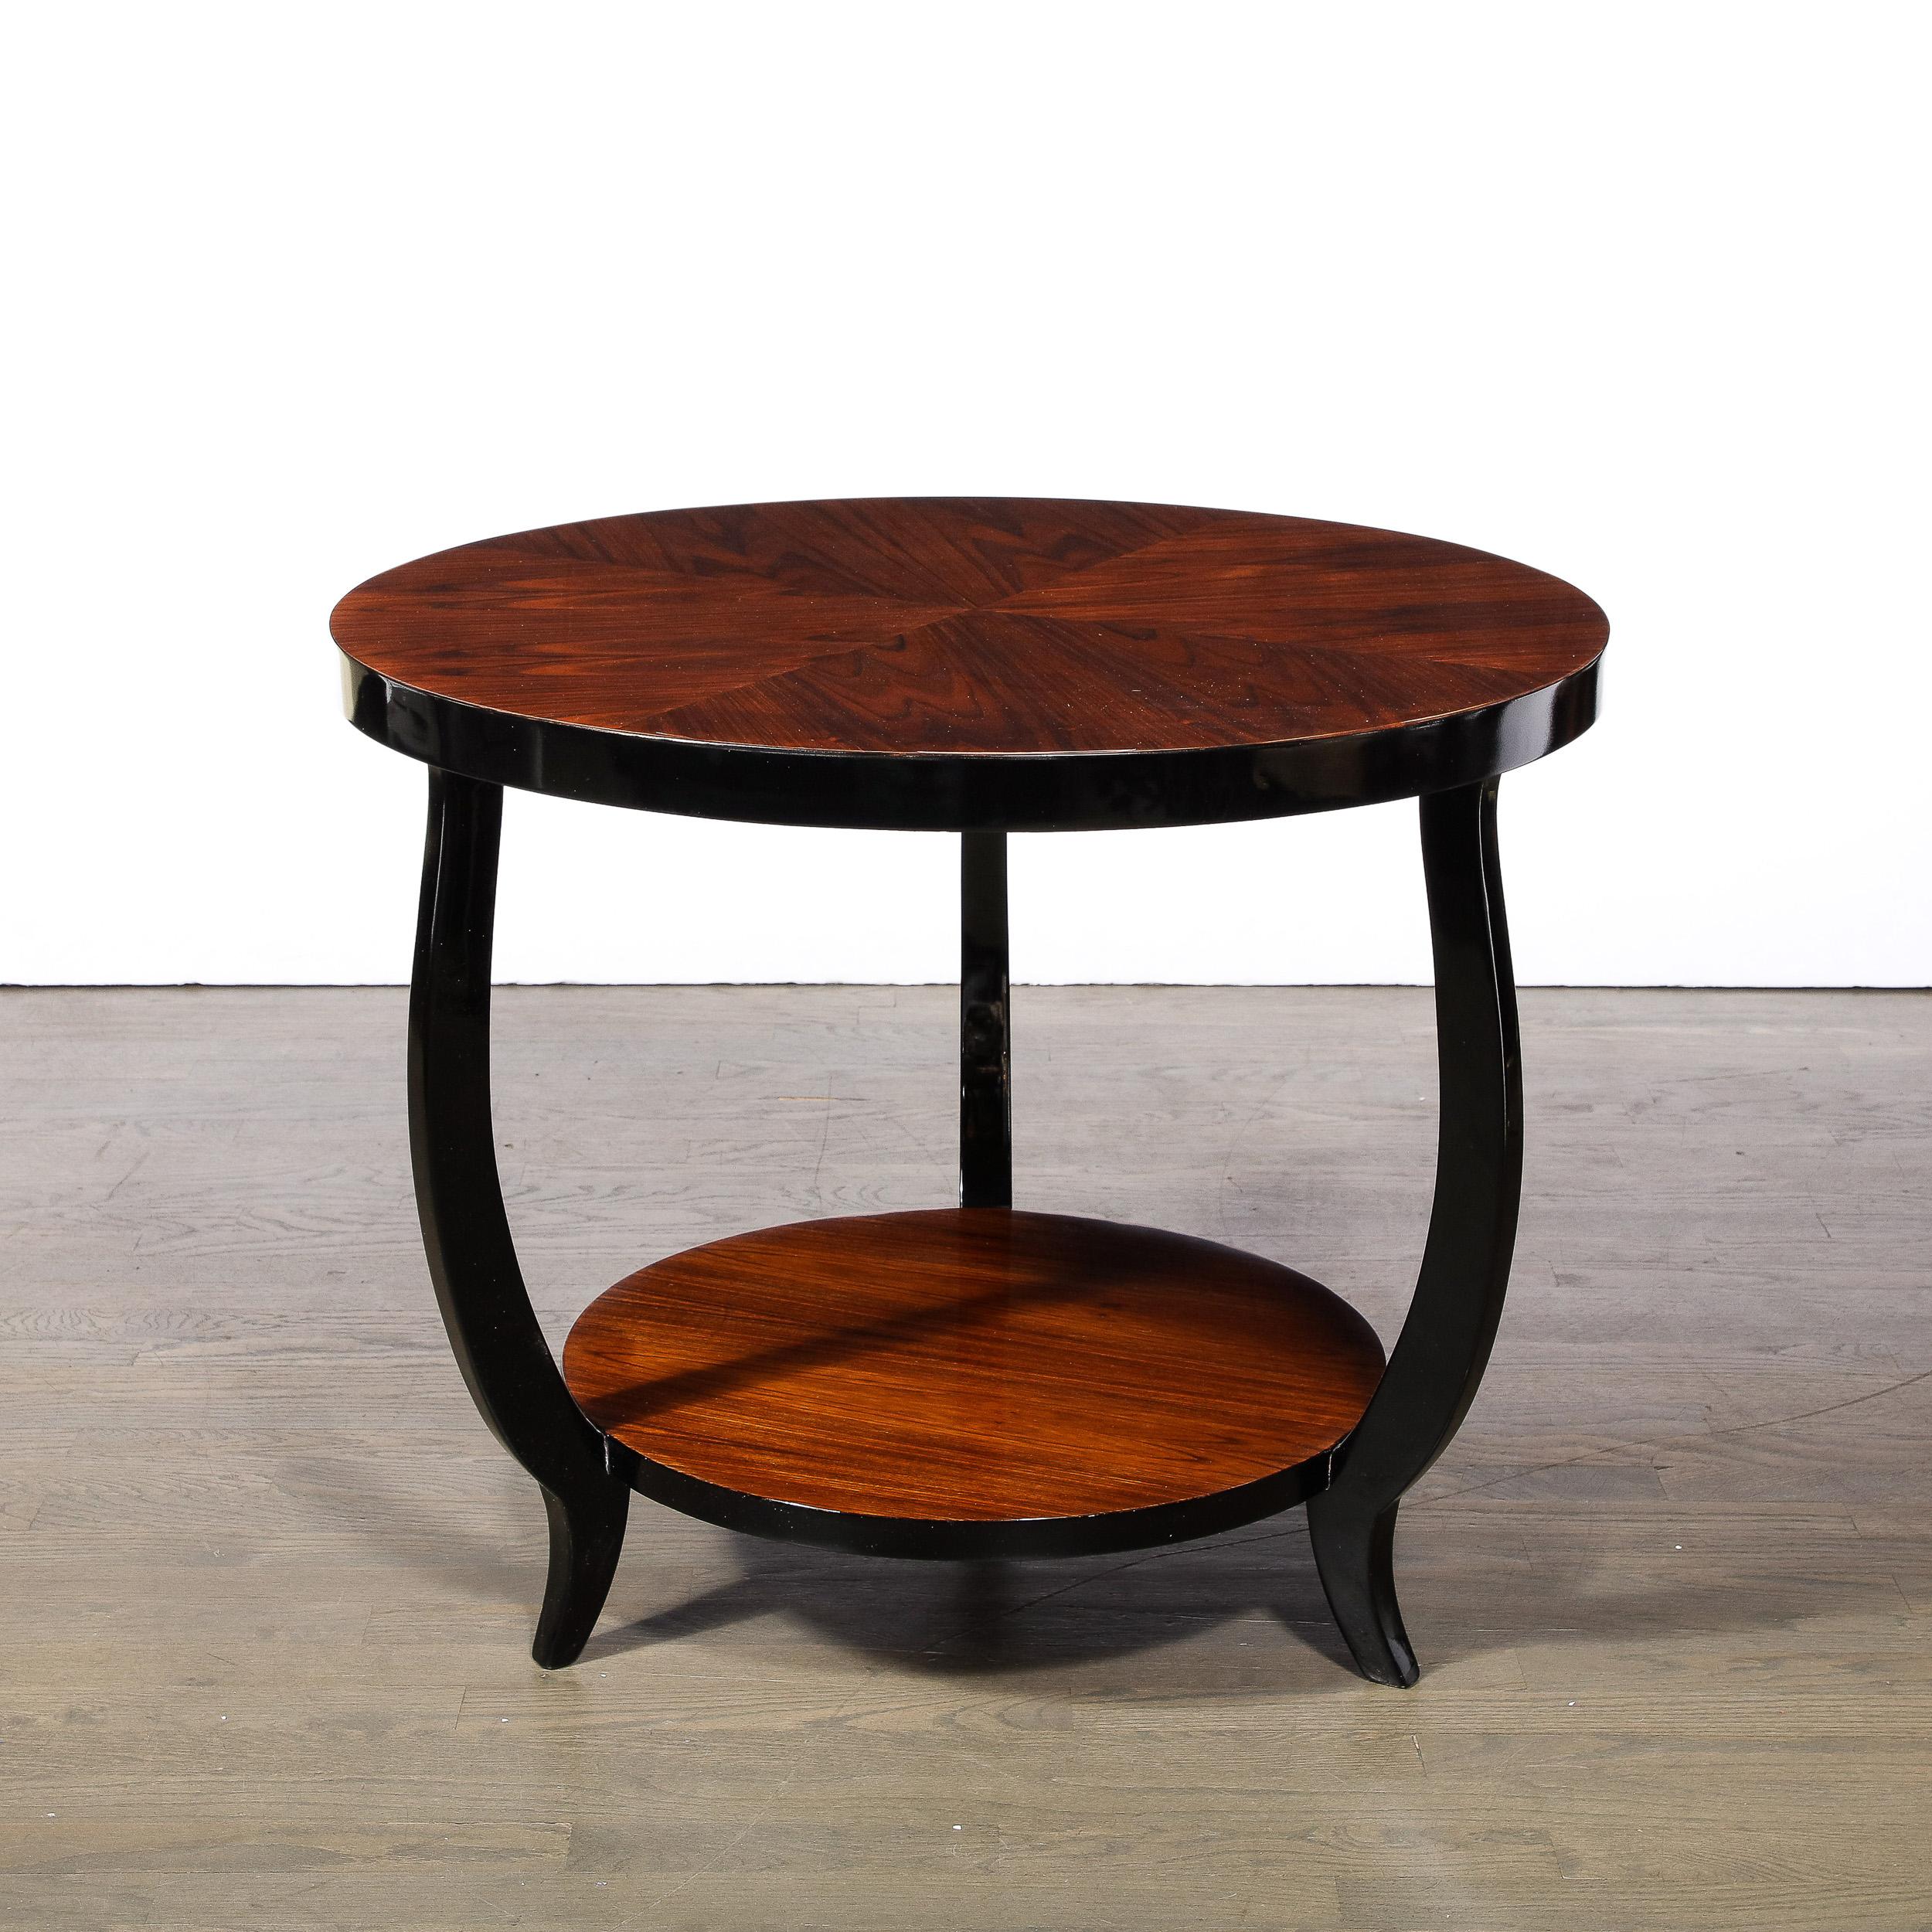 Mid-20th Century Art Deco Two-Tier Gueridon Table in Book-matched Walnut & Black Lacquer  For Sale